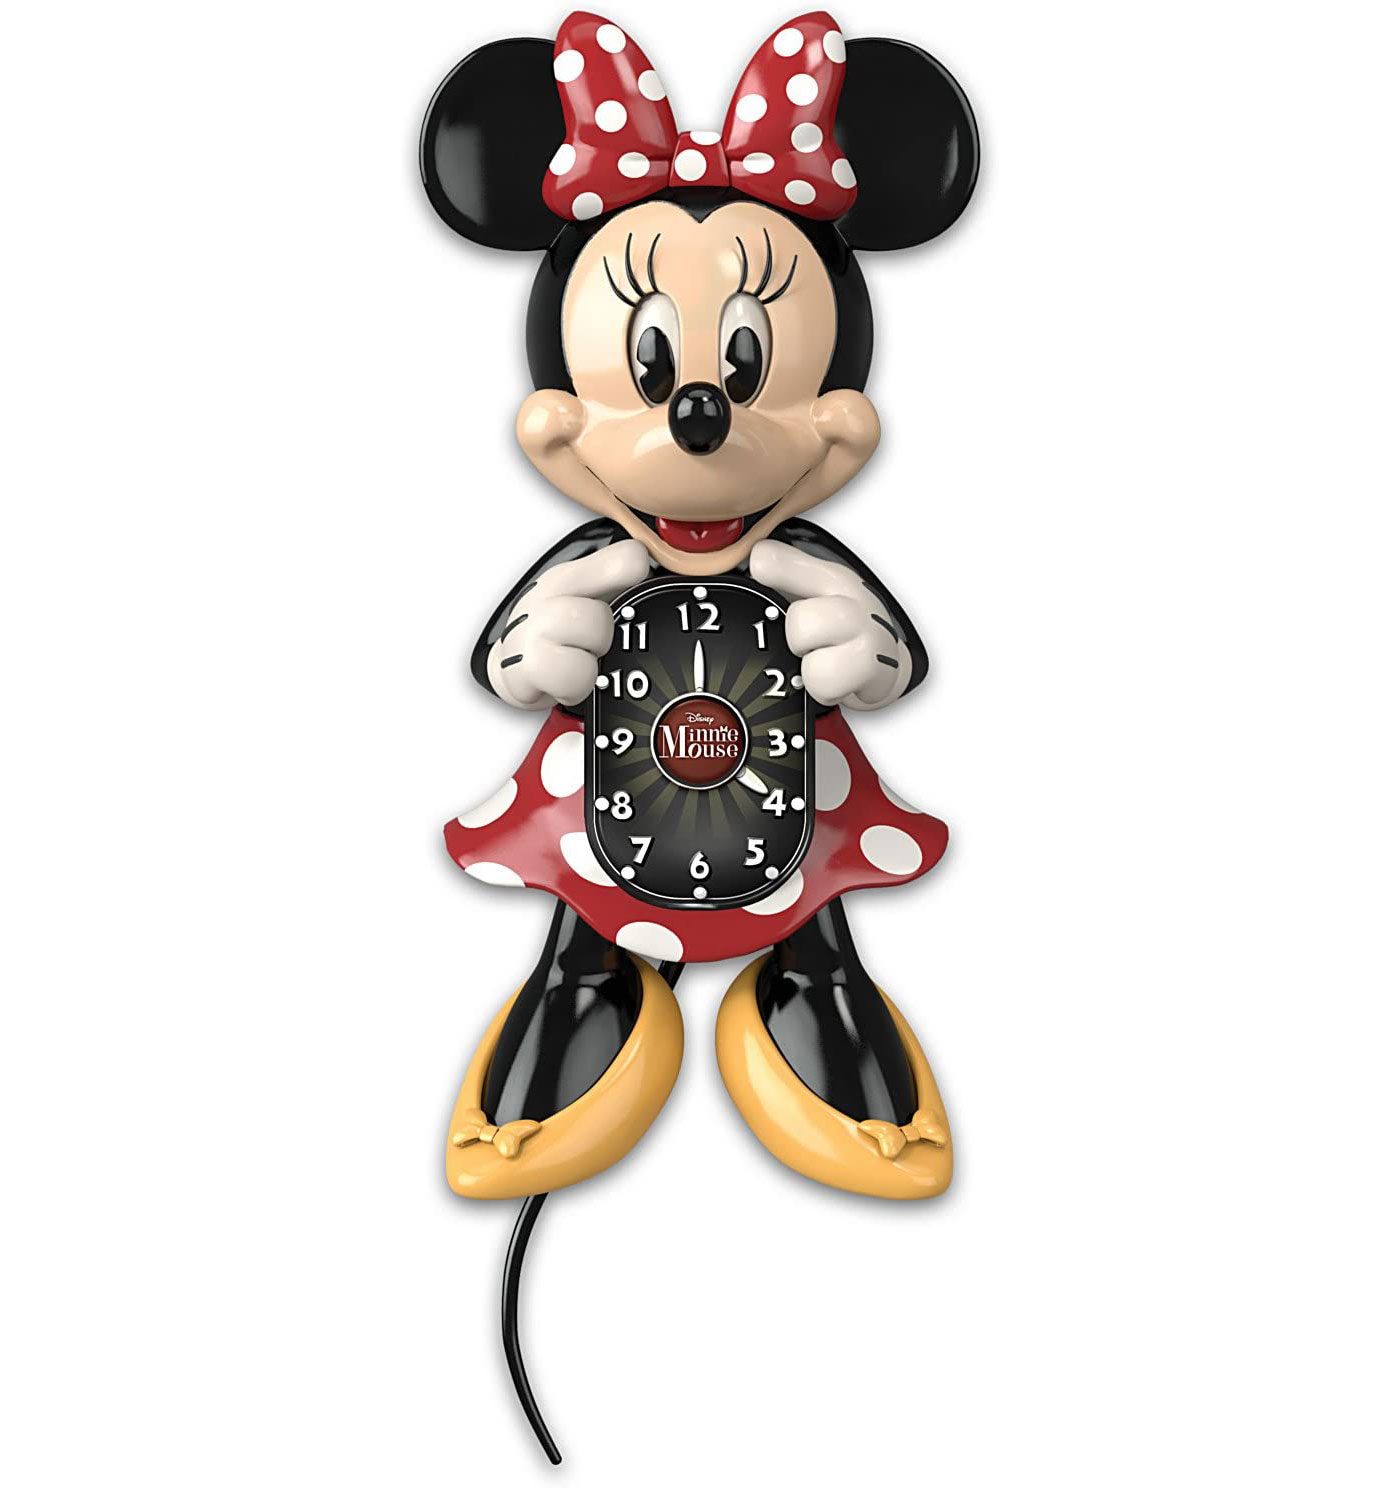 The Bradford Exchange Disney Minnie Mouse Wall Clock with Moving Eyes and Tail